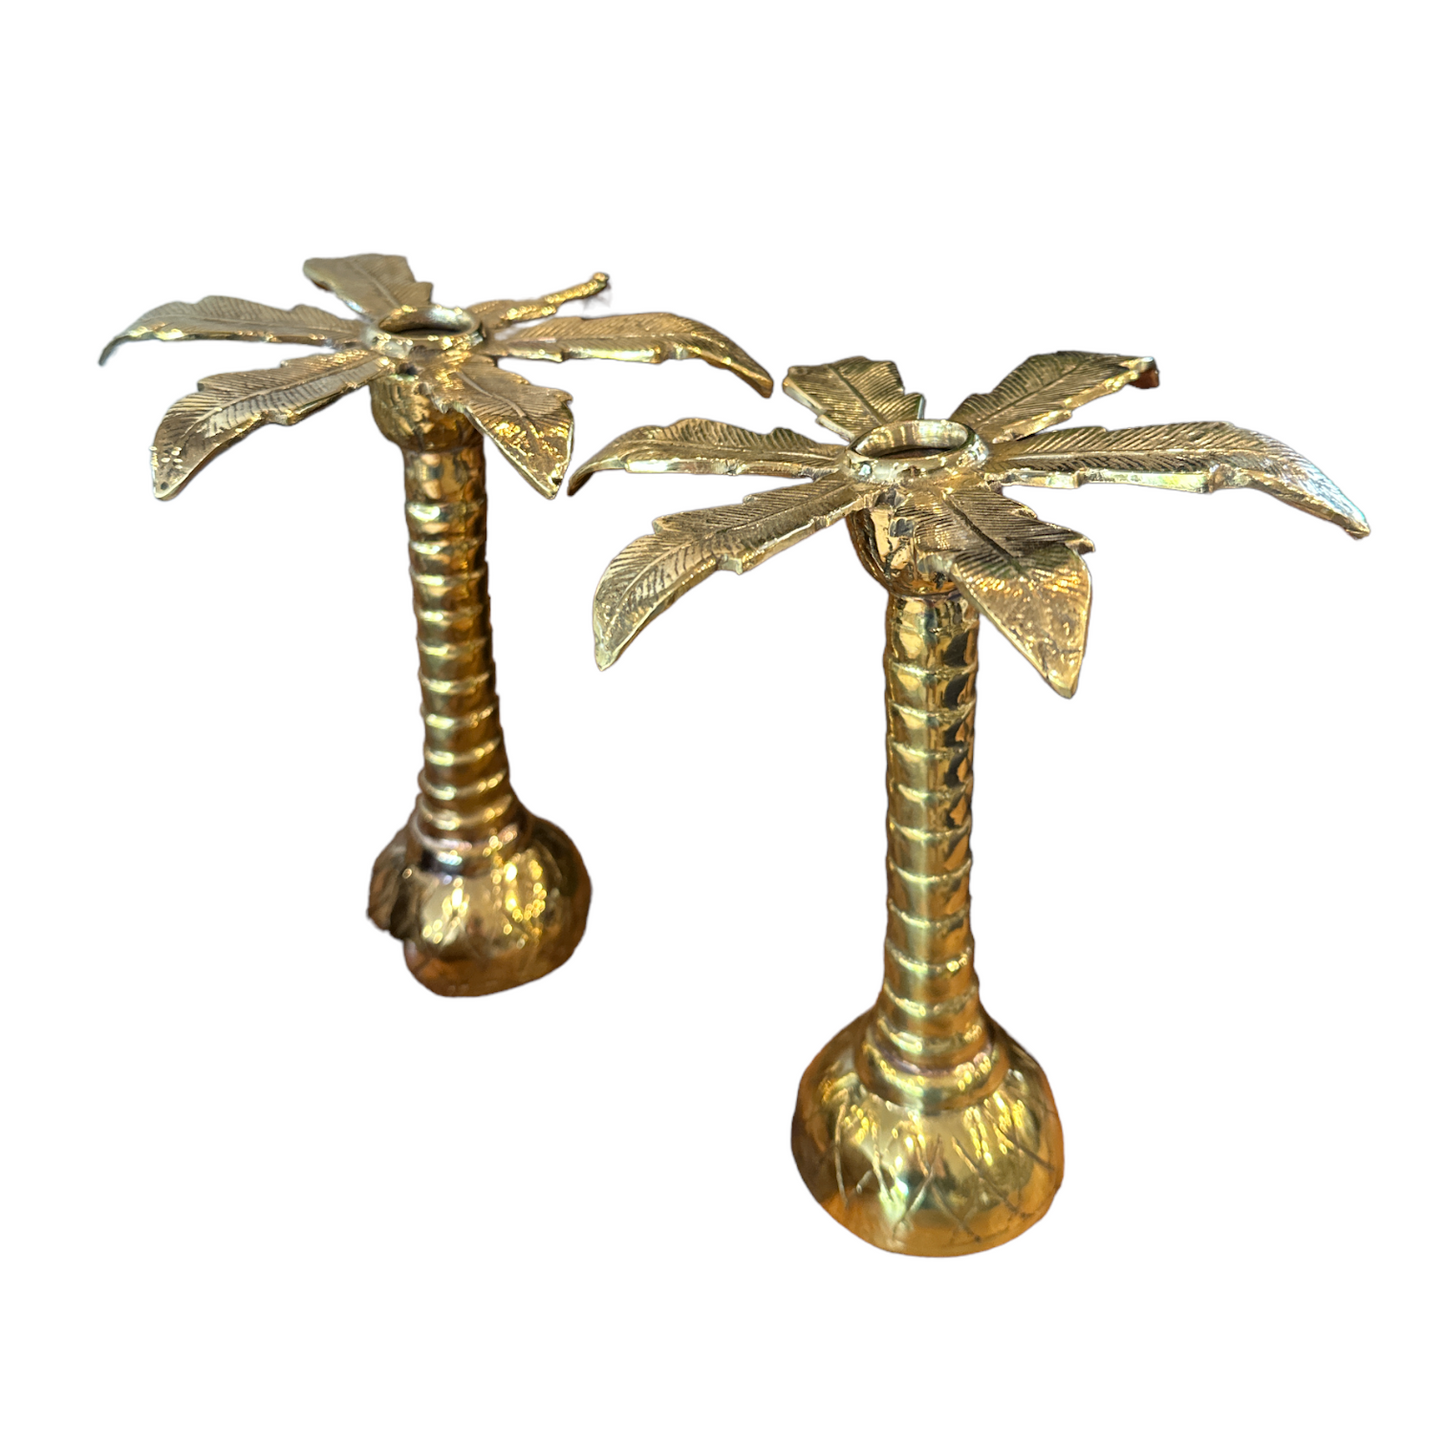 Our Palm Brass Candle Holder is hand forged from solid brass and makes a striking, stylish and fun addition to the table.